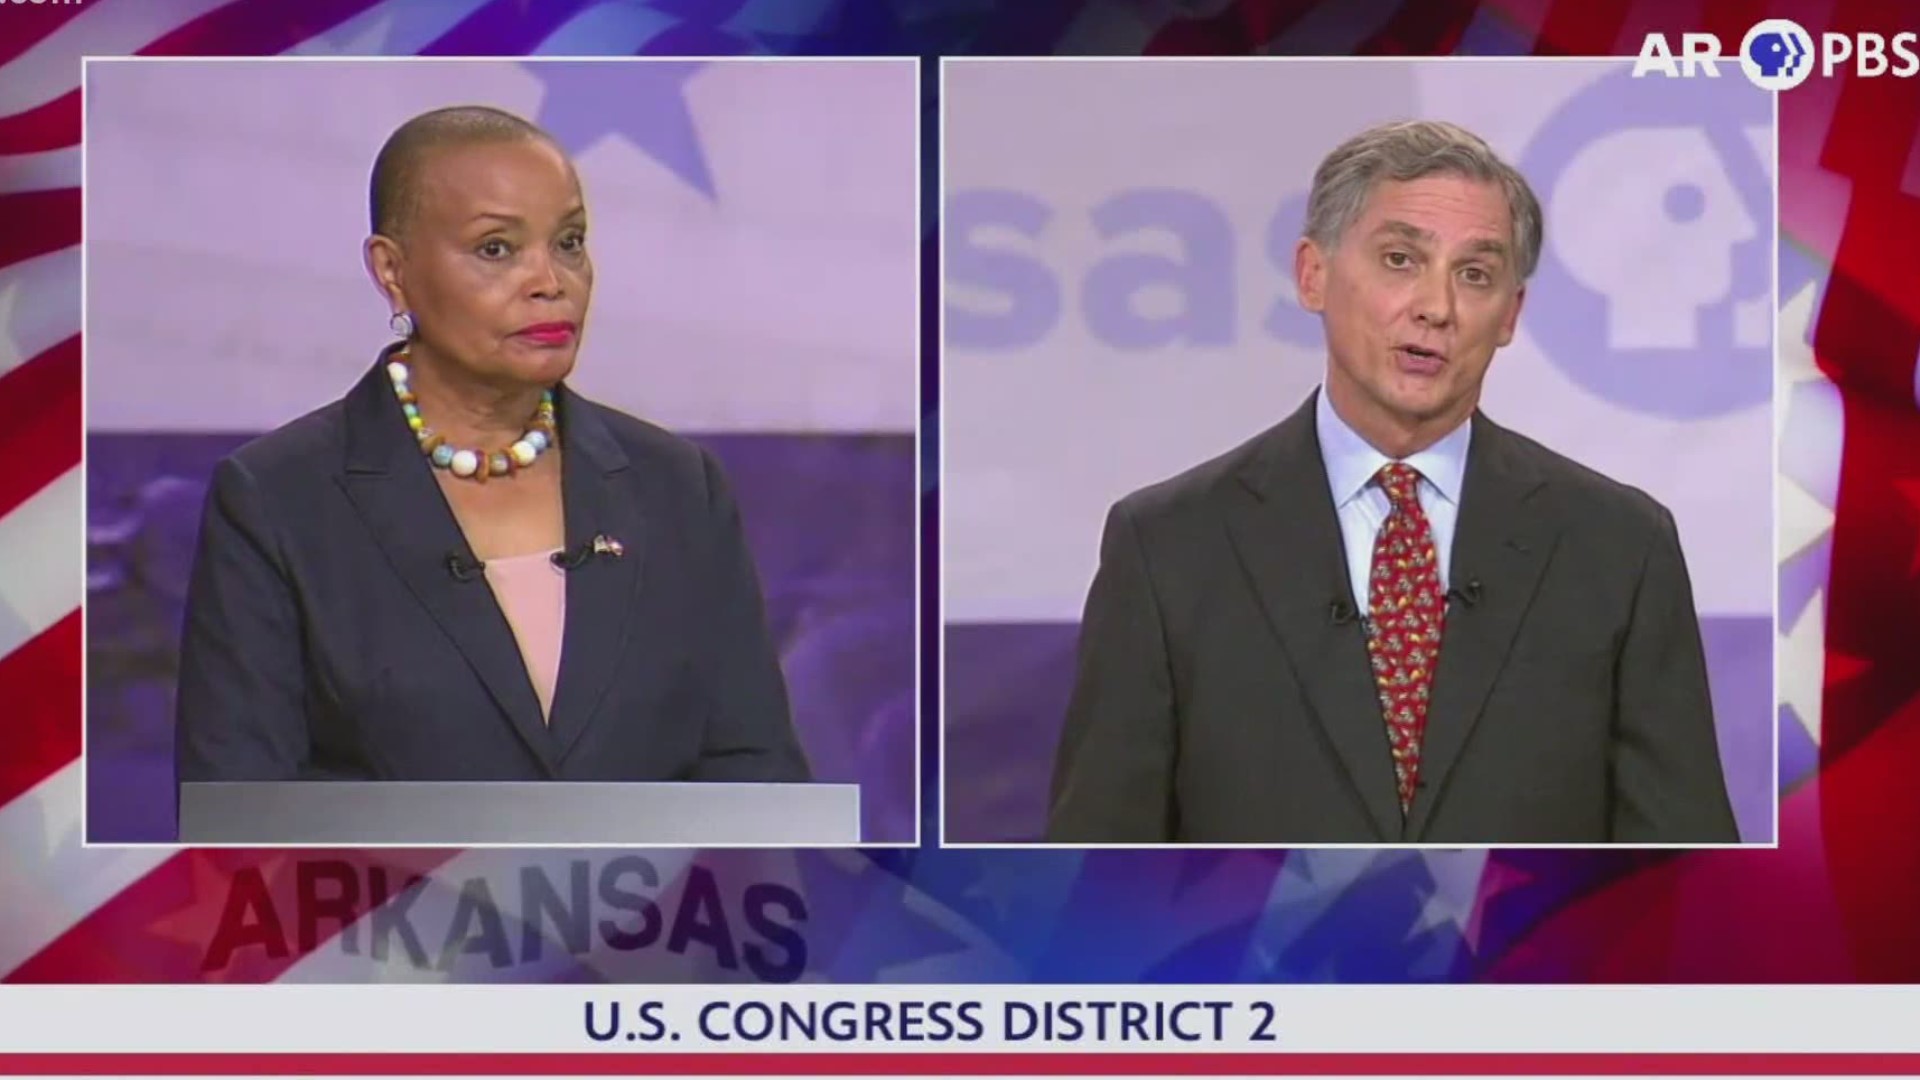 Incumbent Rep. French Hill (R) and challenger Joyce Elliott (D) faced off on the debate. Both accused the other of lying though they did it with civility.